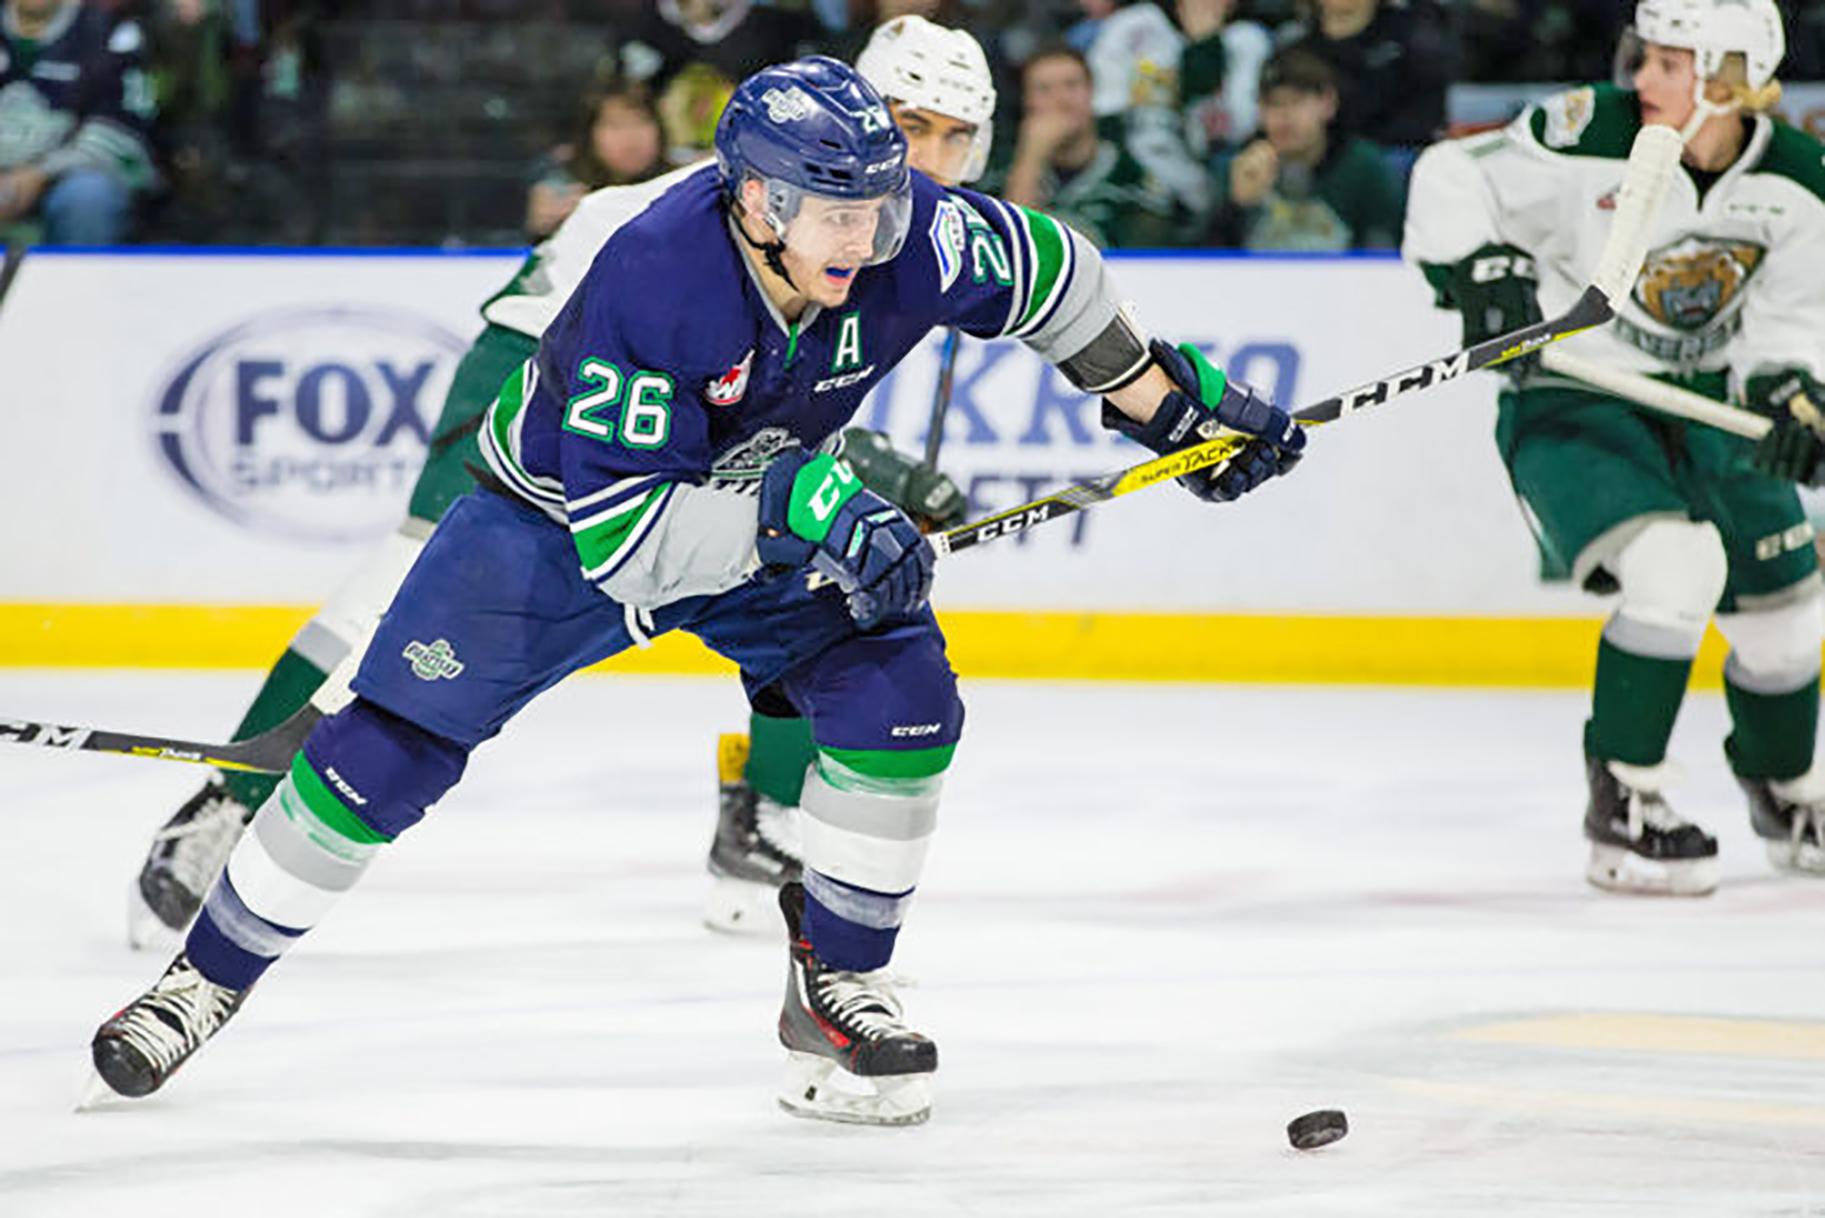 The Thunderbirds’ Nolan Volcan brings the puck up the ice against the Silvertips on Friday night. COURTESY PHOTO, Chris Mast